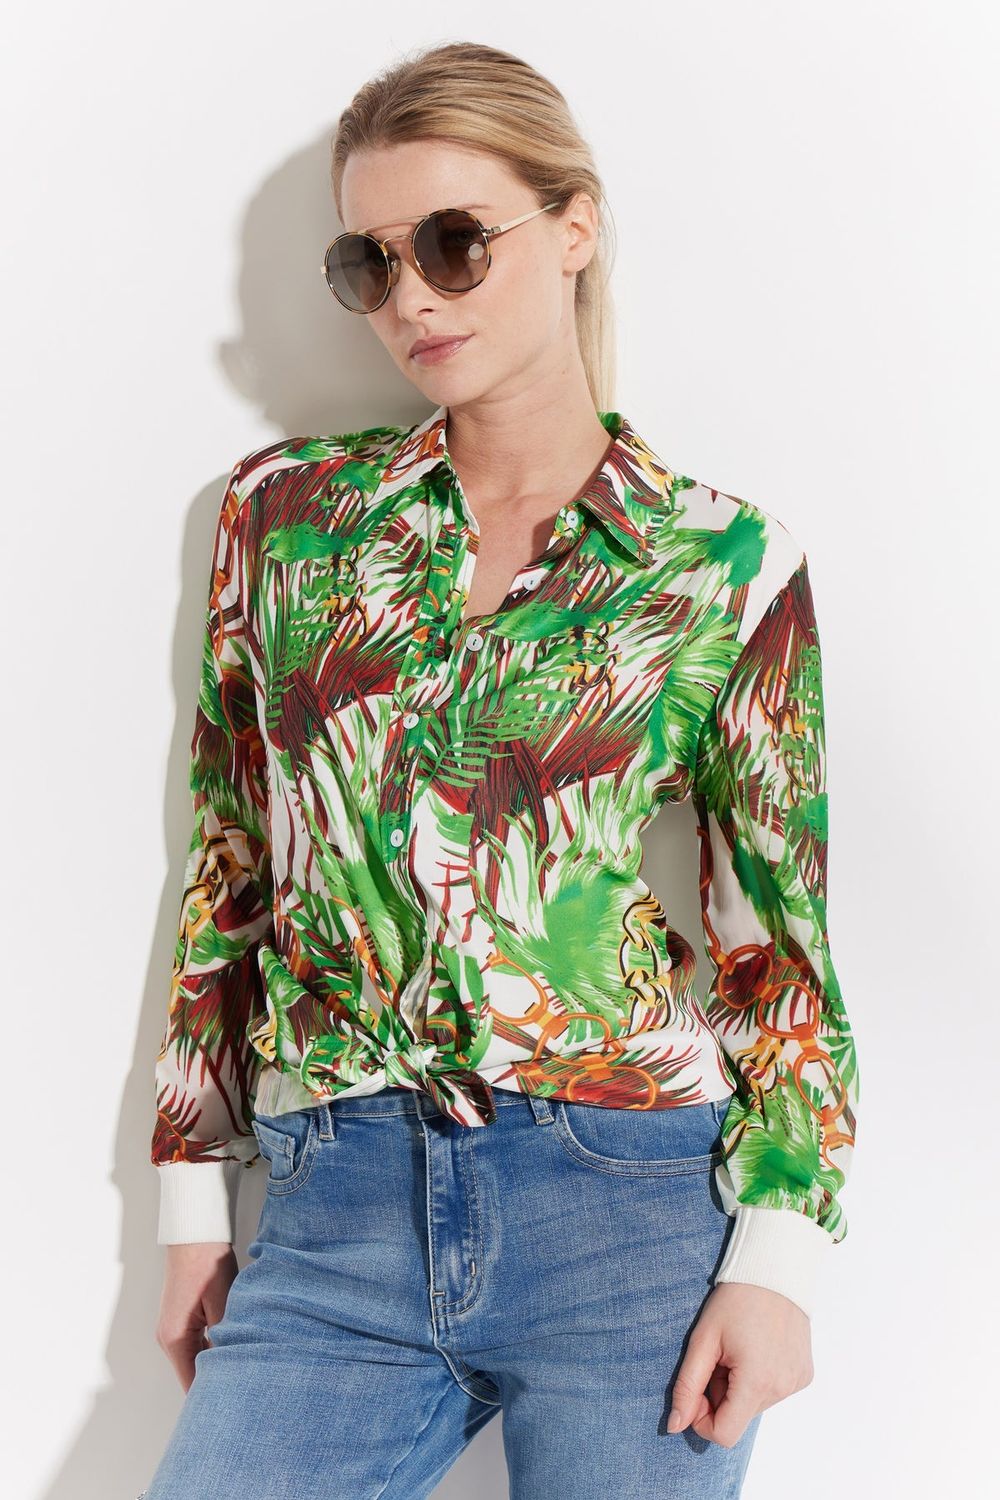 OOLALA Printed Button Front Shirt, Color: Ivory, Size: S